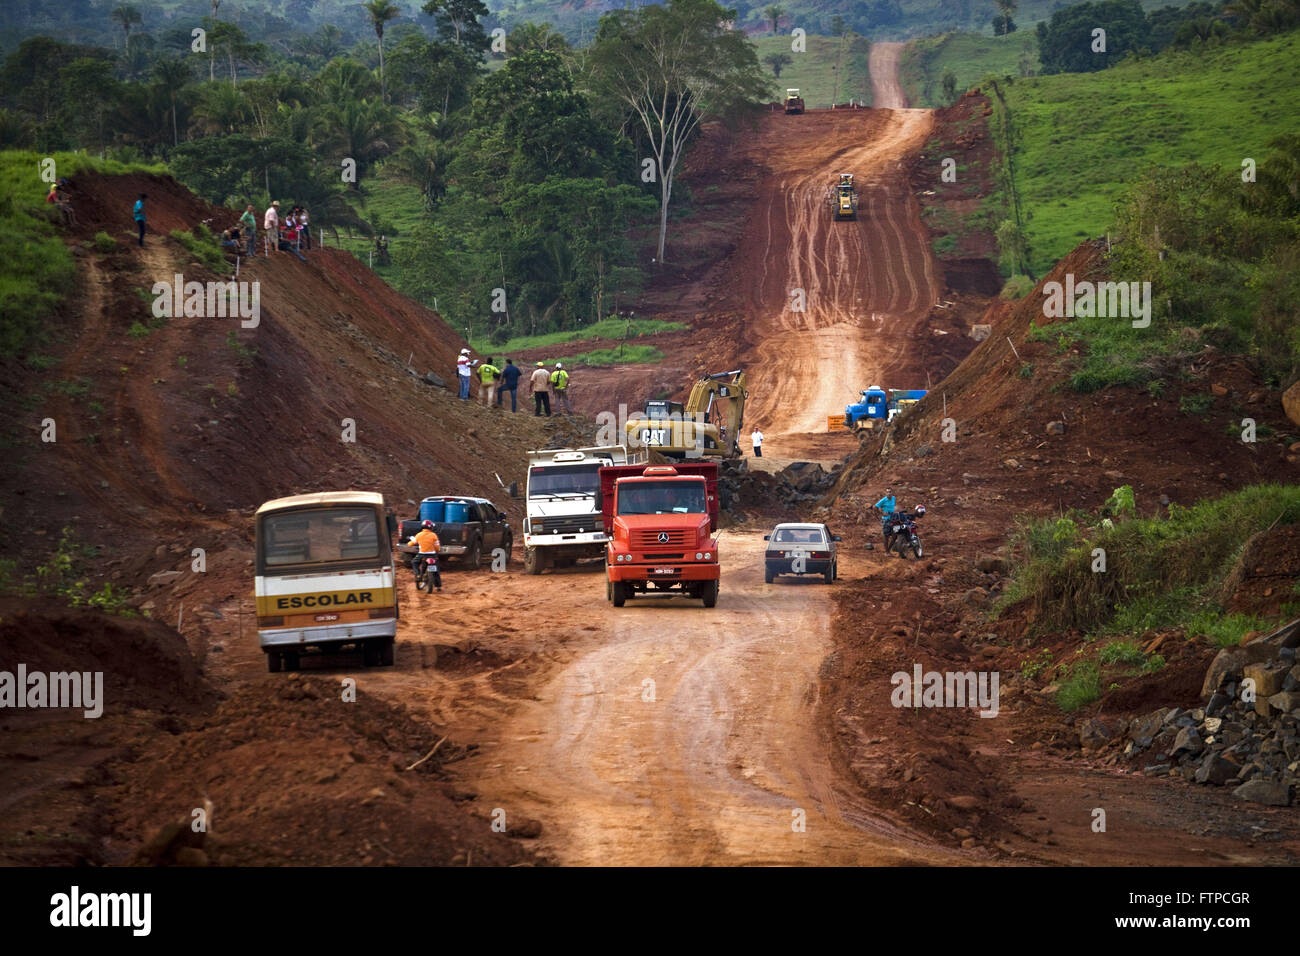 Workers along dirt road. Stock Photo